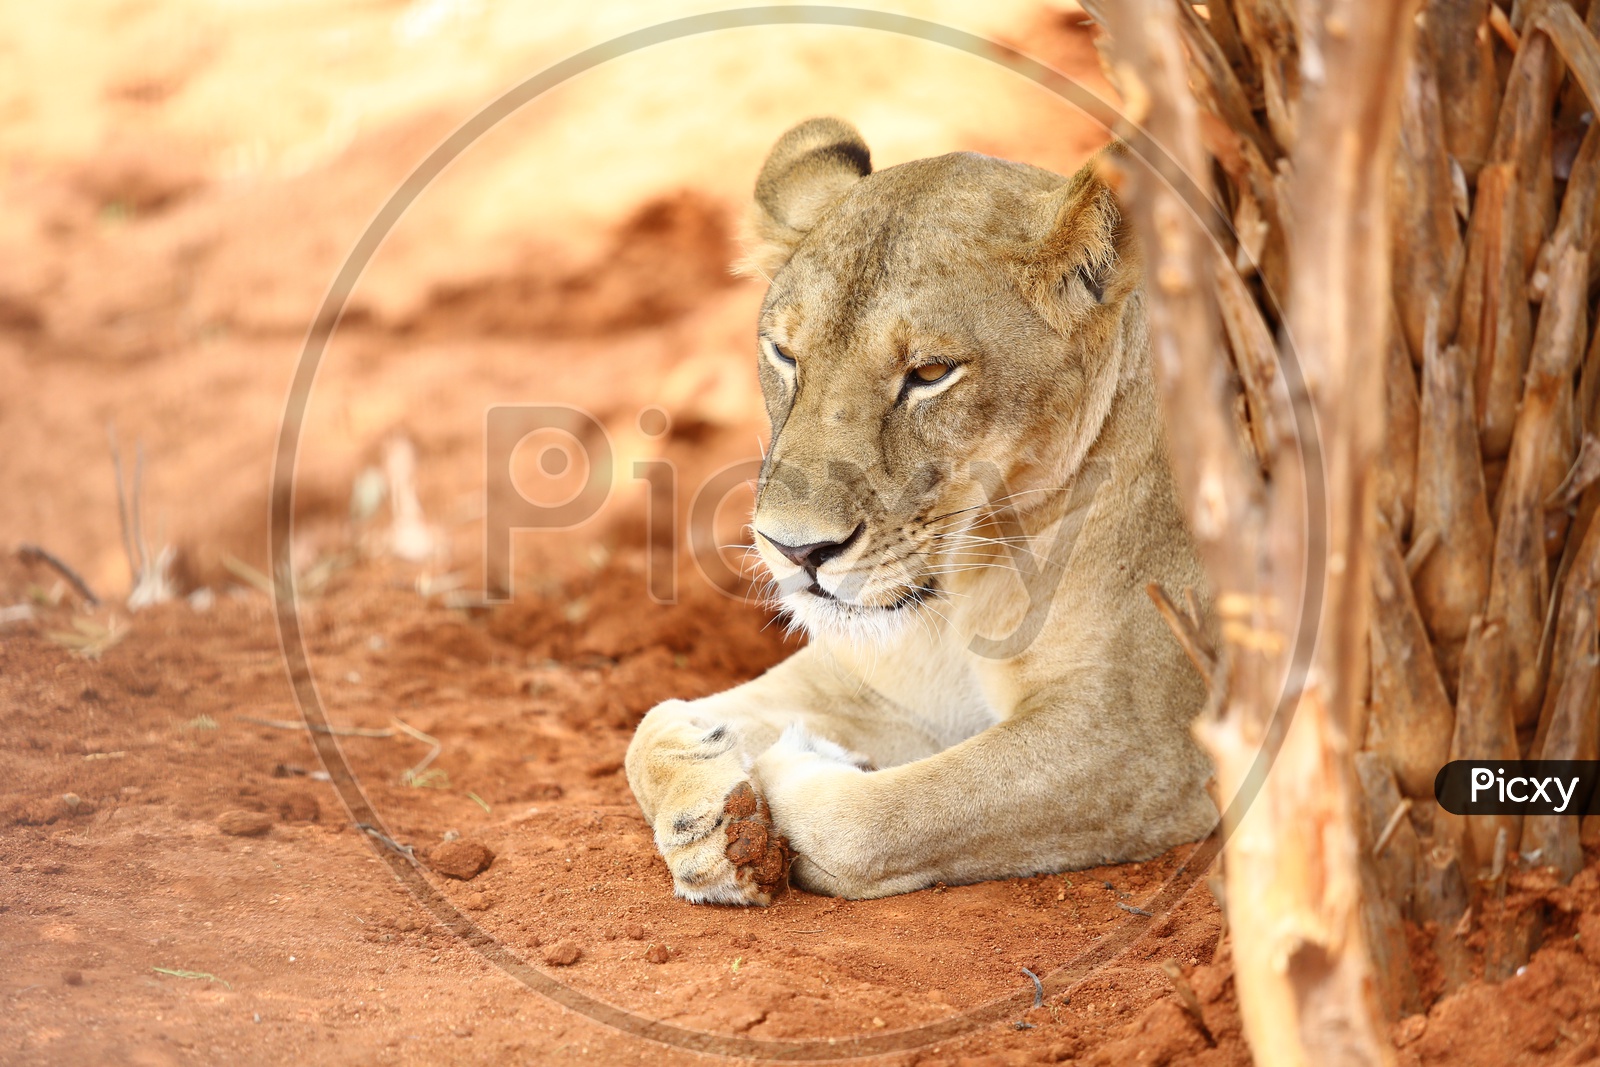 Lion Cub In a Zoo